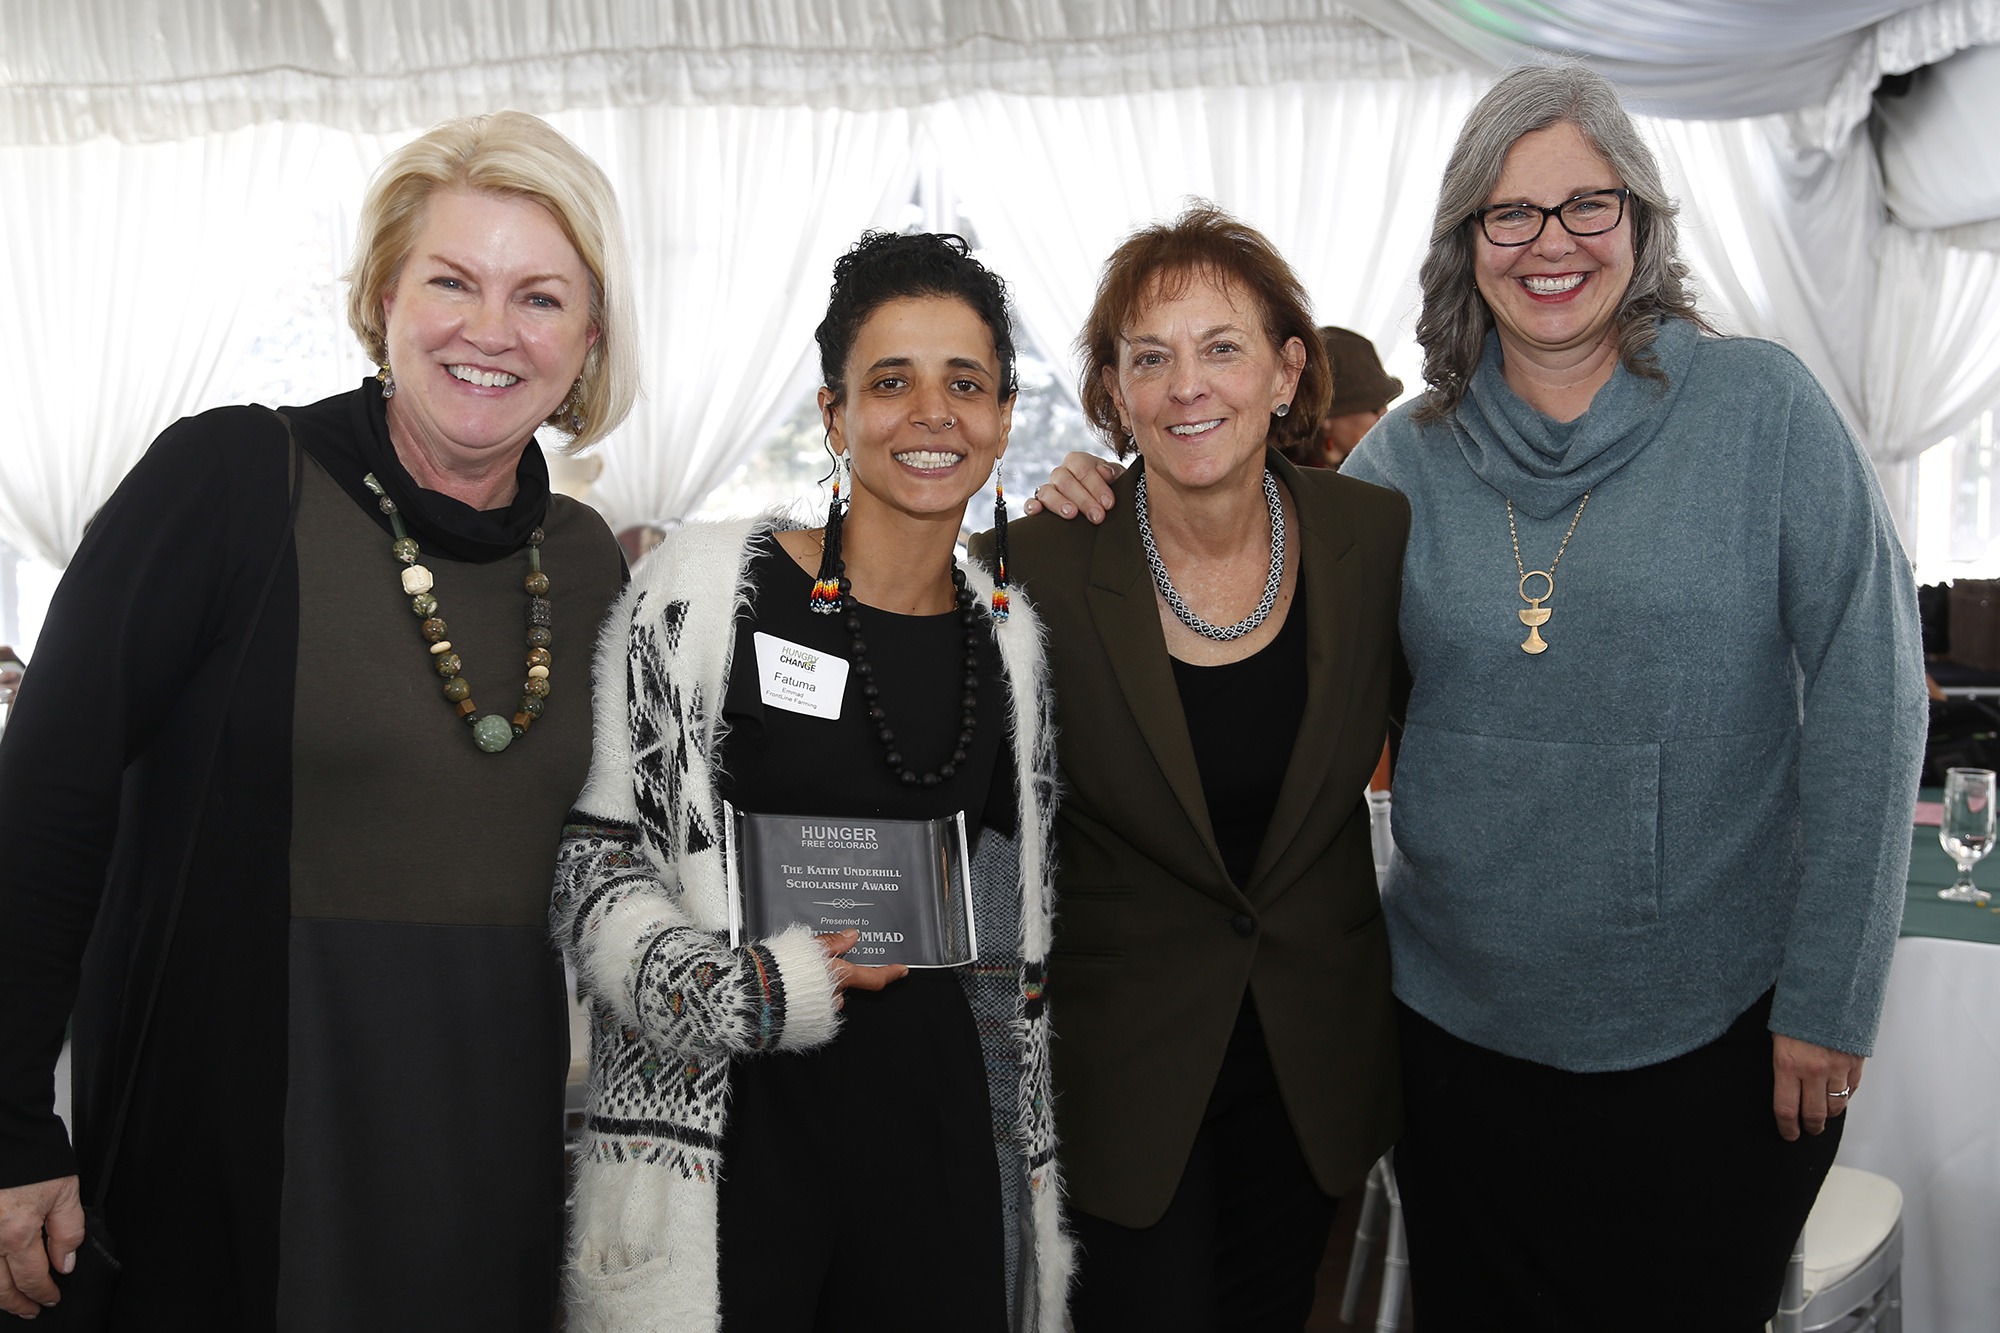 Four women smile and side-hug. The second to the left holds a clear award that says "The Kathy Underhill Scholarship award"